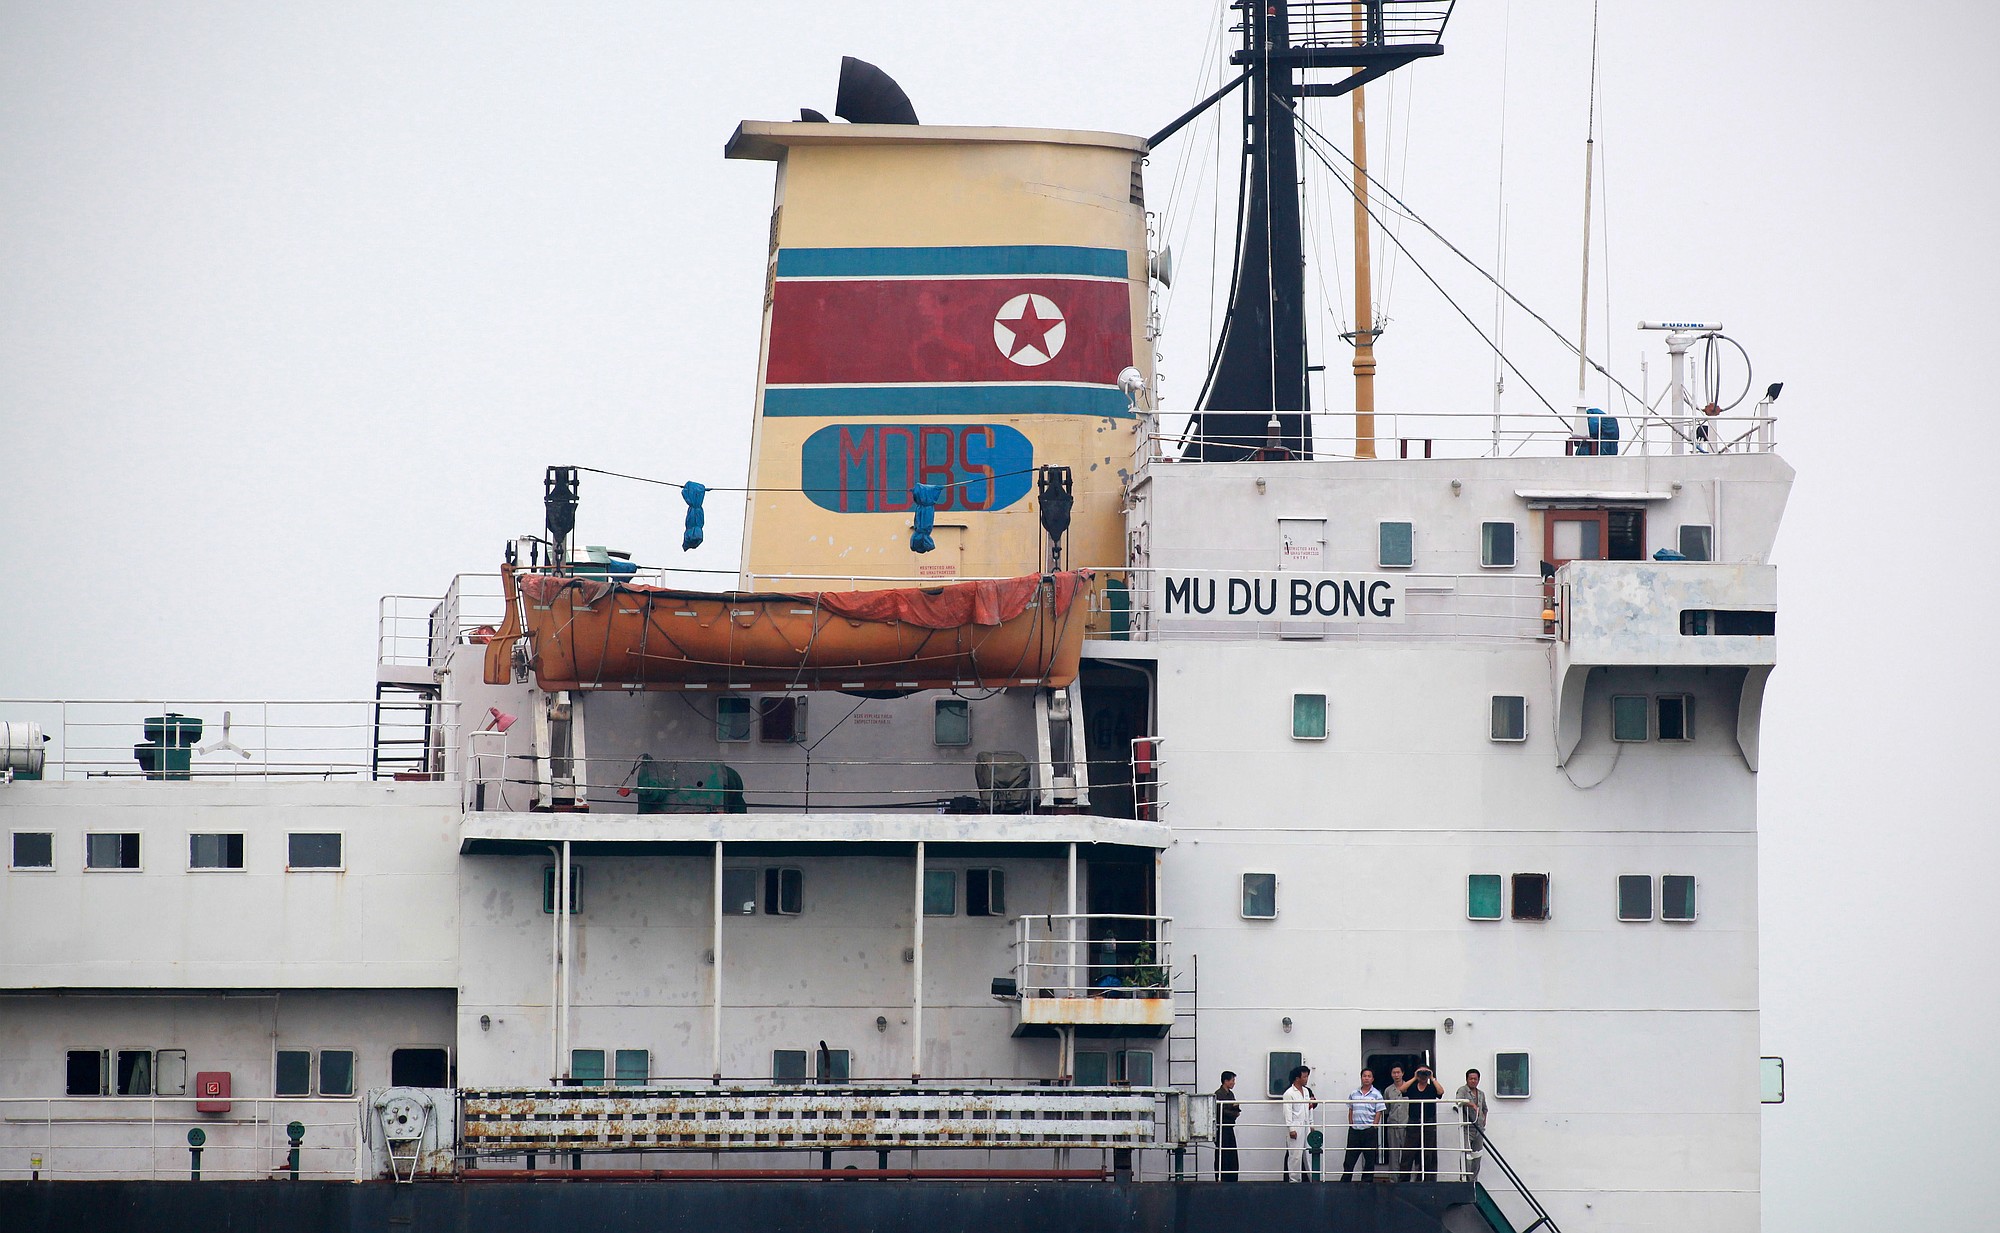 In this April 9, 2015 photo, the North Korean cargo ship Mu Du Bong sits anchored in the port of Tuxpan, Mexico, after it accidentally ran aground off Mexico in July 2014. Despite North Korea's protests, a panel of experts that monitors U.N. sanctions against Pyongyang for its nuclear and missile programs asked the Mexican government not to release the boat. North Korean diplomats have said the ship was carrying nothing prohibited by sanctions.